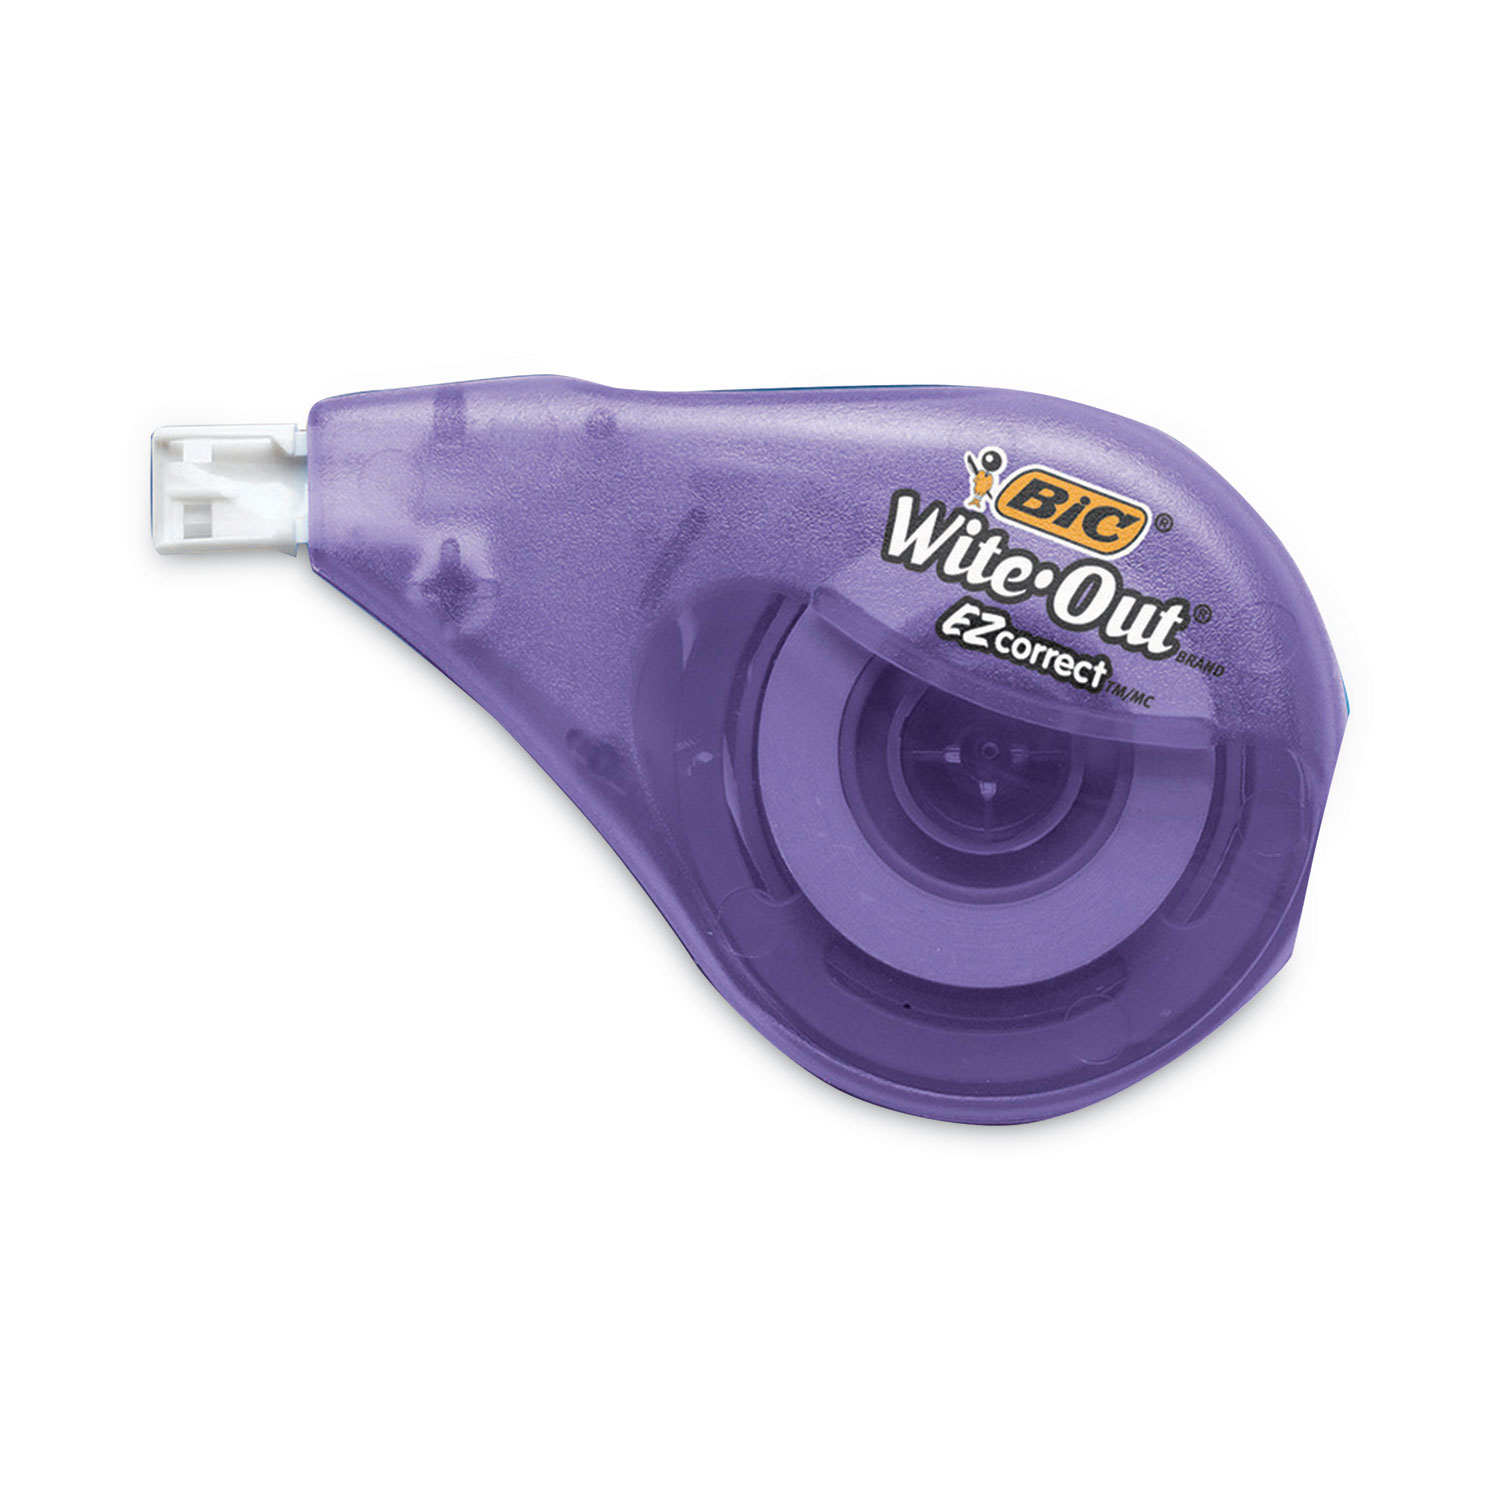 BIC Wite-Out Brand EZ Correct Correction Tape, White, 10 Pack